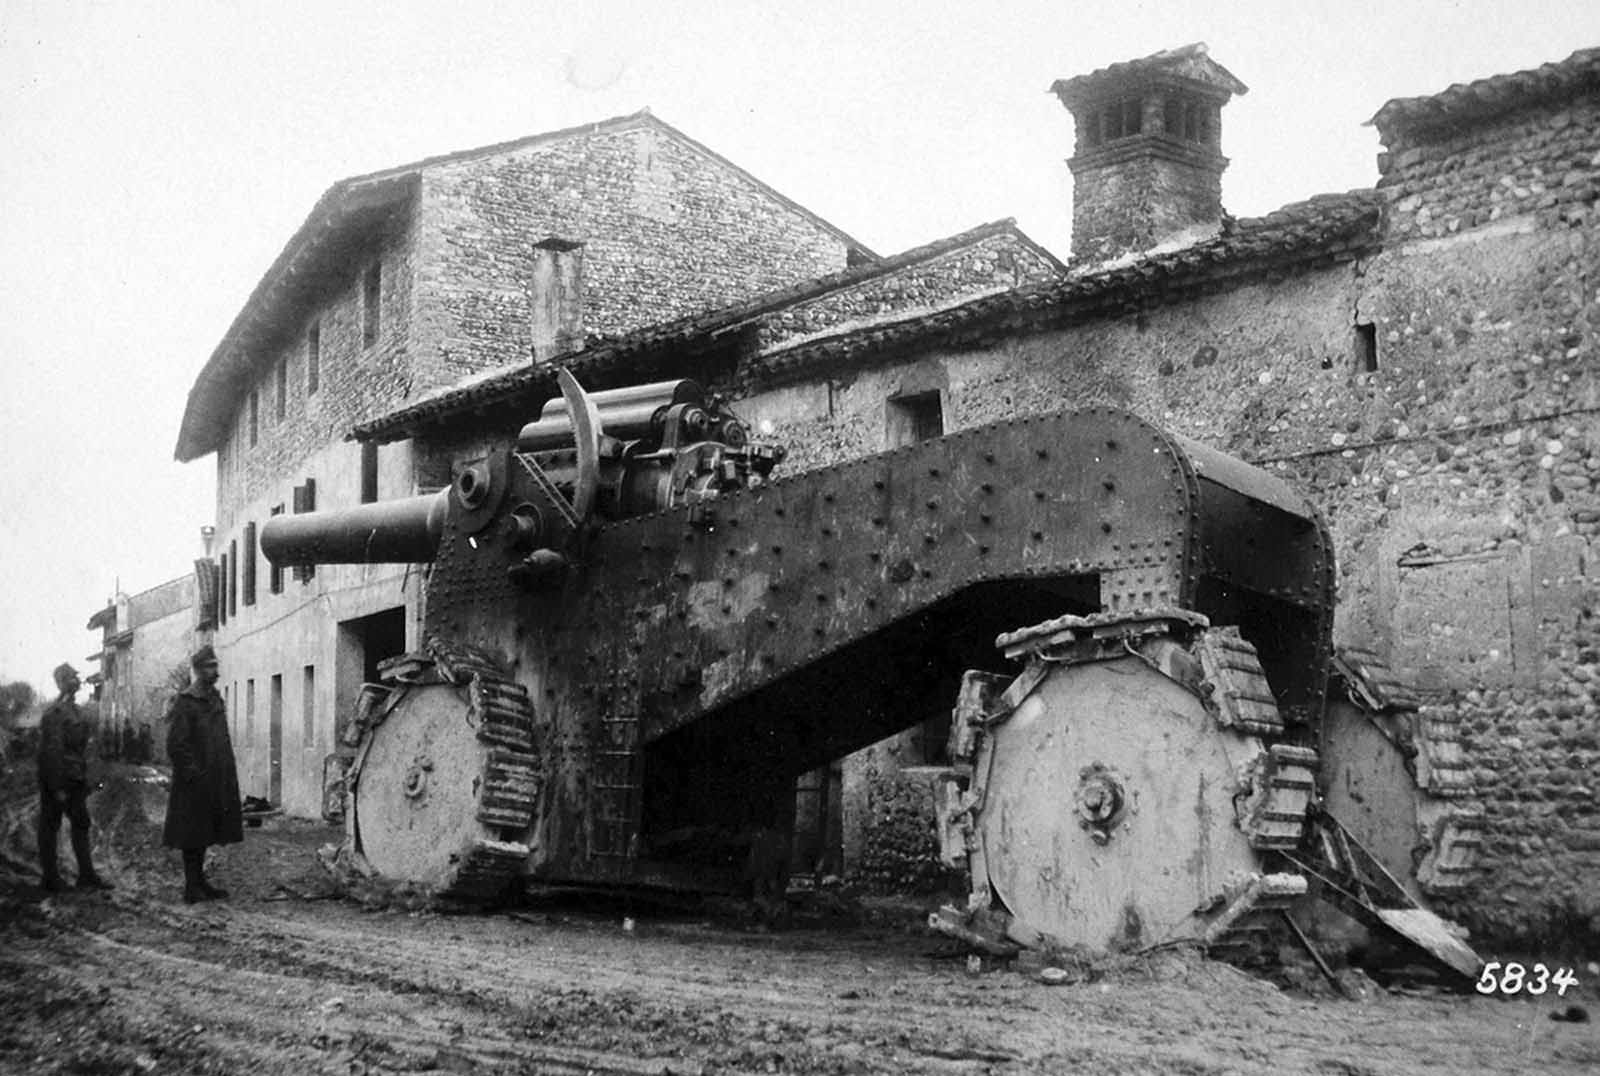 The original caption reads: “The Italian collapse in Venezia. The heedless flight of the Italians to the Tagliamento. Captured heavy and gigantic cannon in a village behind Udine. November 1917”. Pictured is an Obice da 305/17, a huge Italian howitzer, one of fewer than 50 produced during the war.